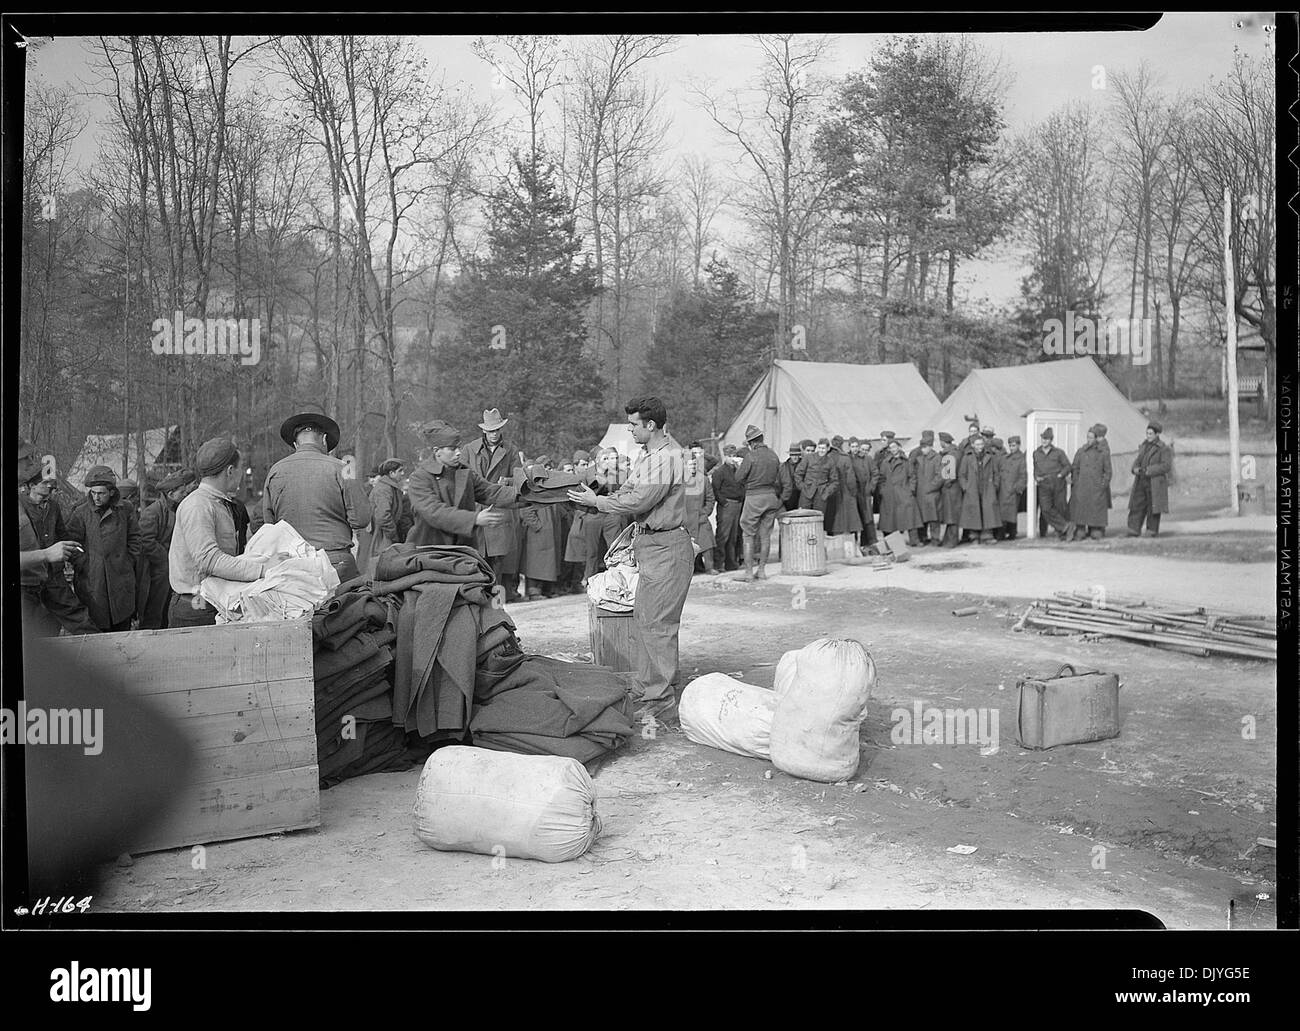 Issuing cots and blankets to new replacements just arrived from New York at CCC Camp, TVA 5E23, located just north of... 532782 Stock Photo